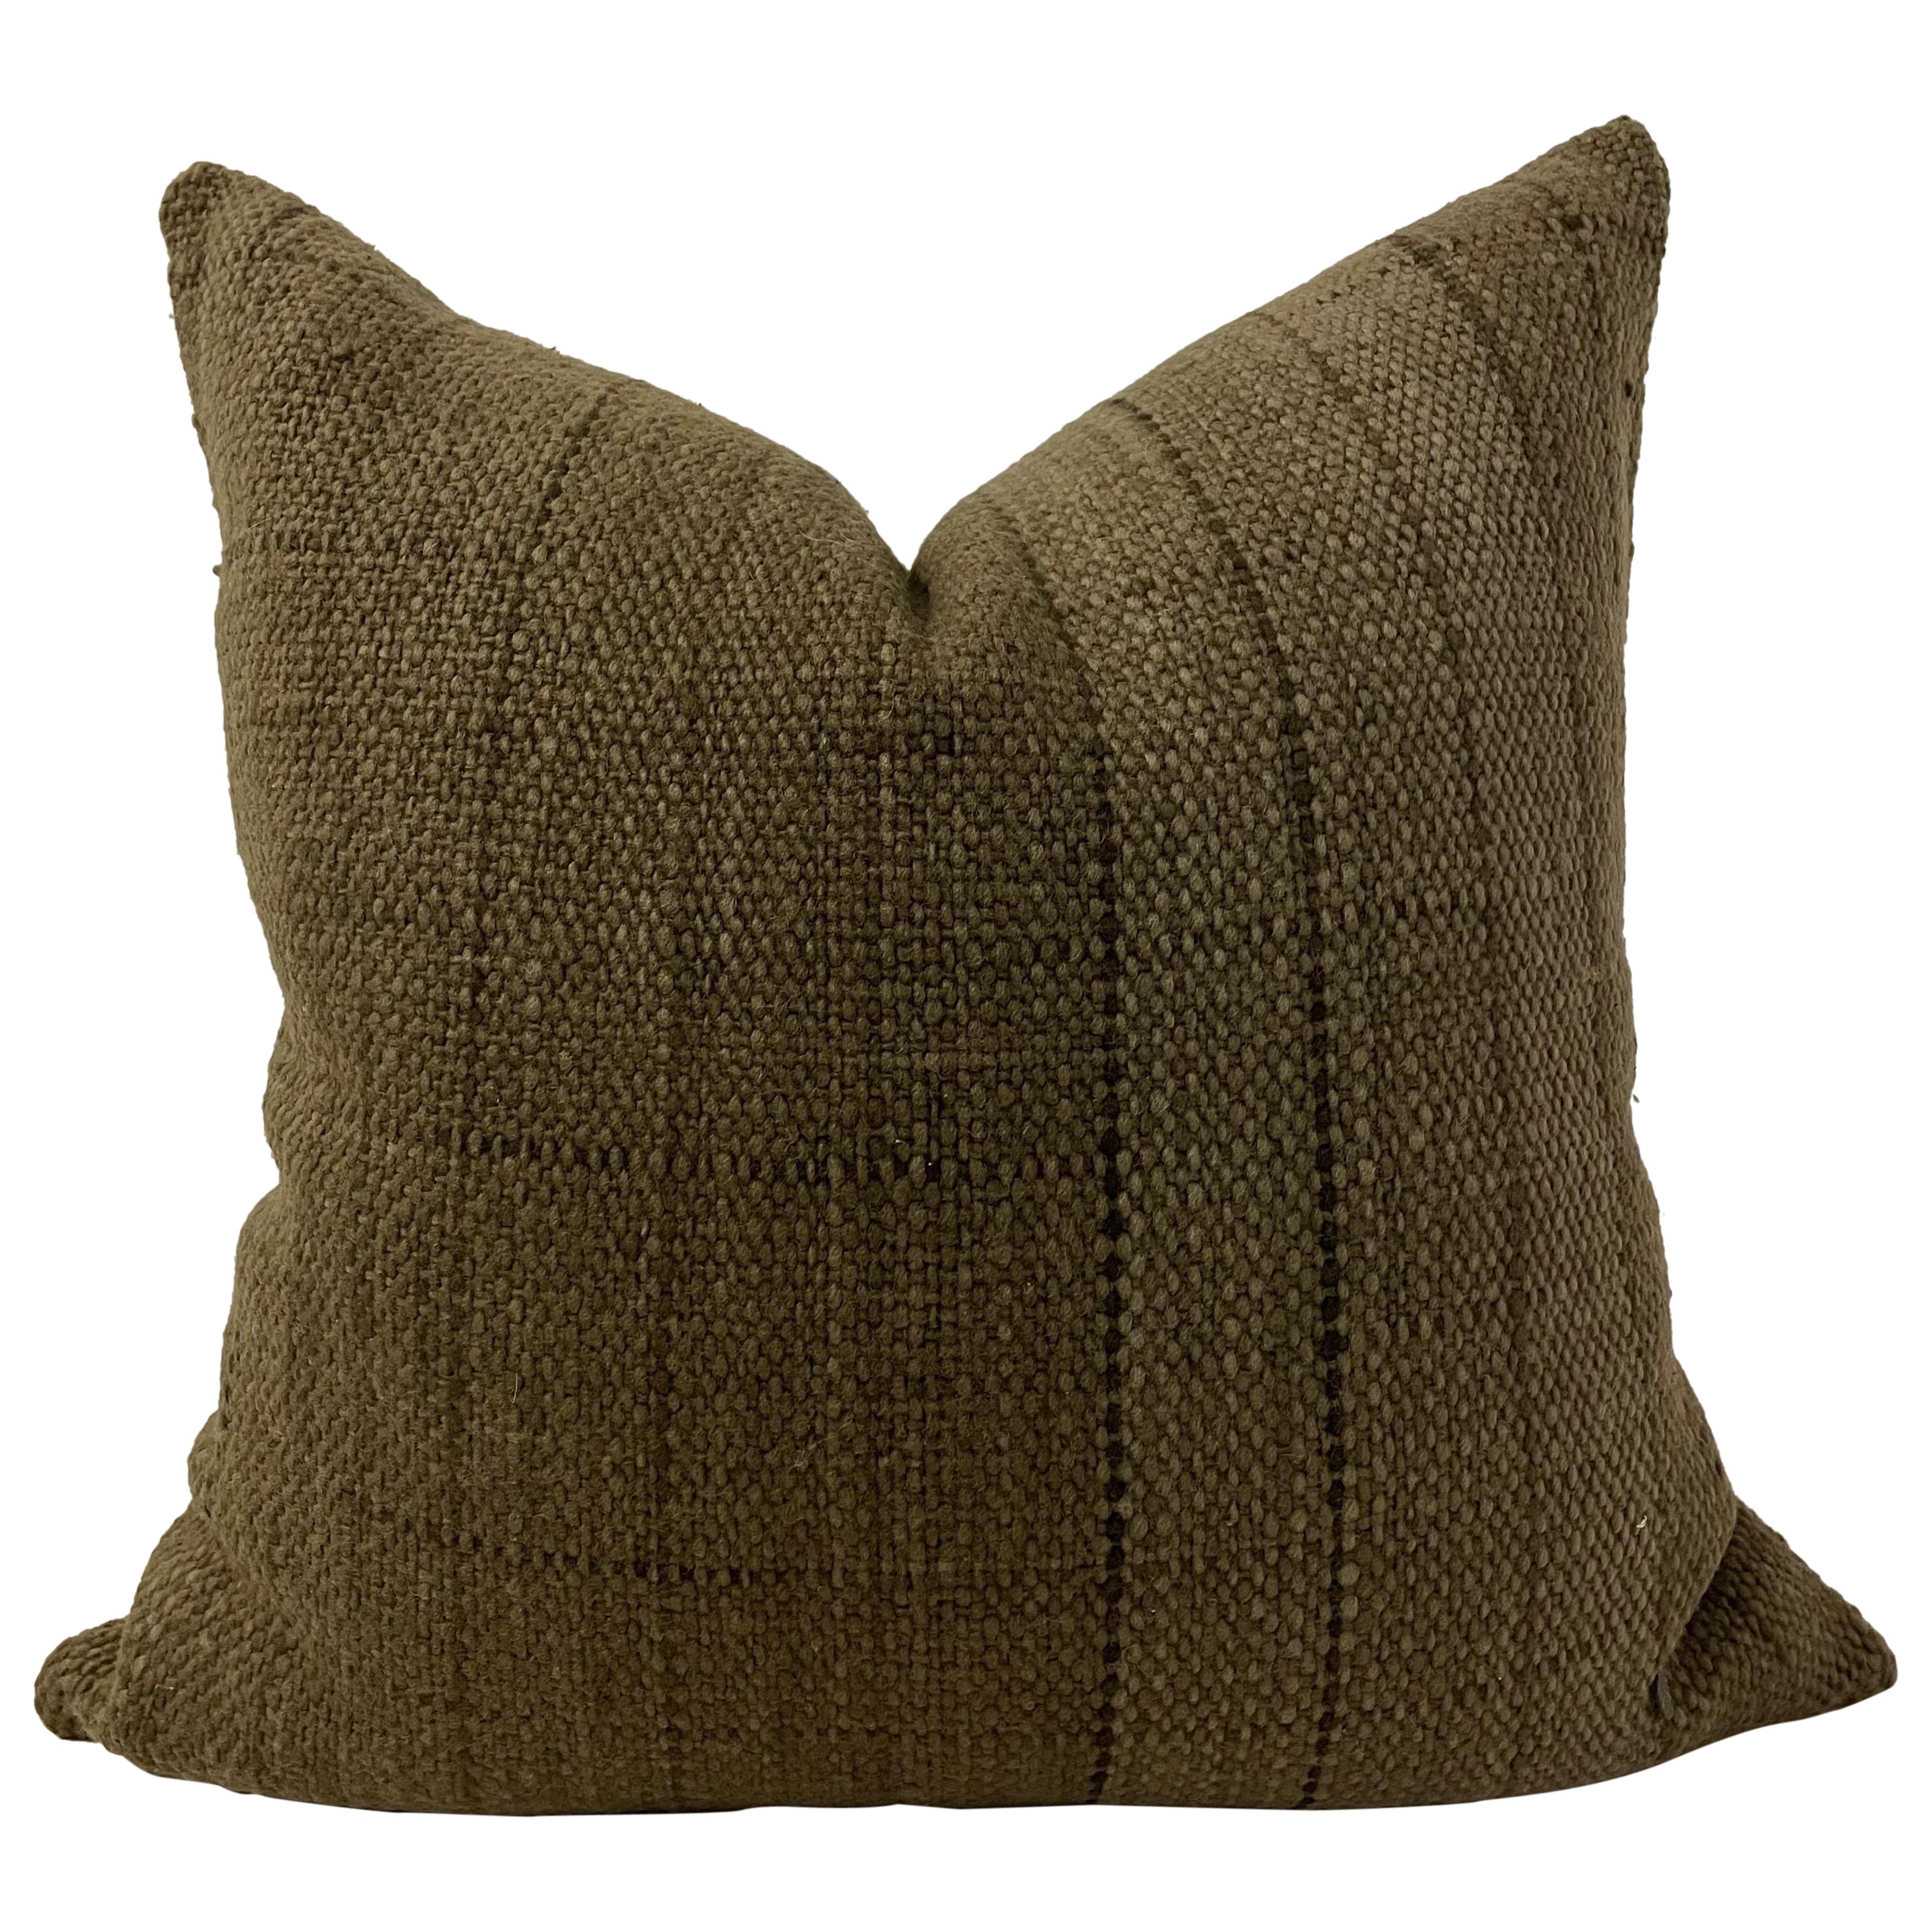 Custom Woven Wool Pillow Cover in Moss Green For Sale